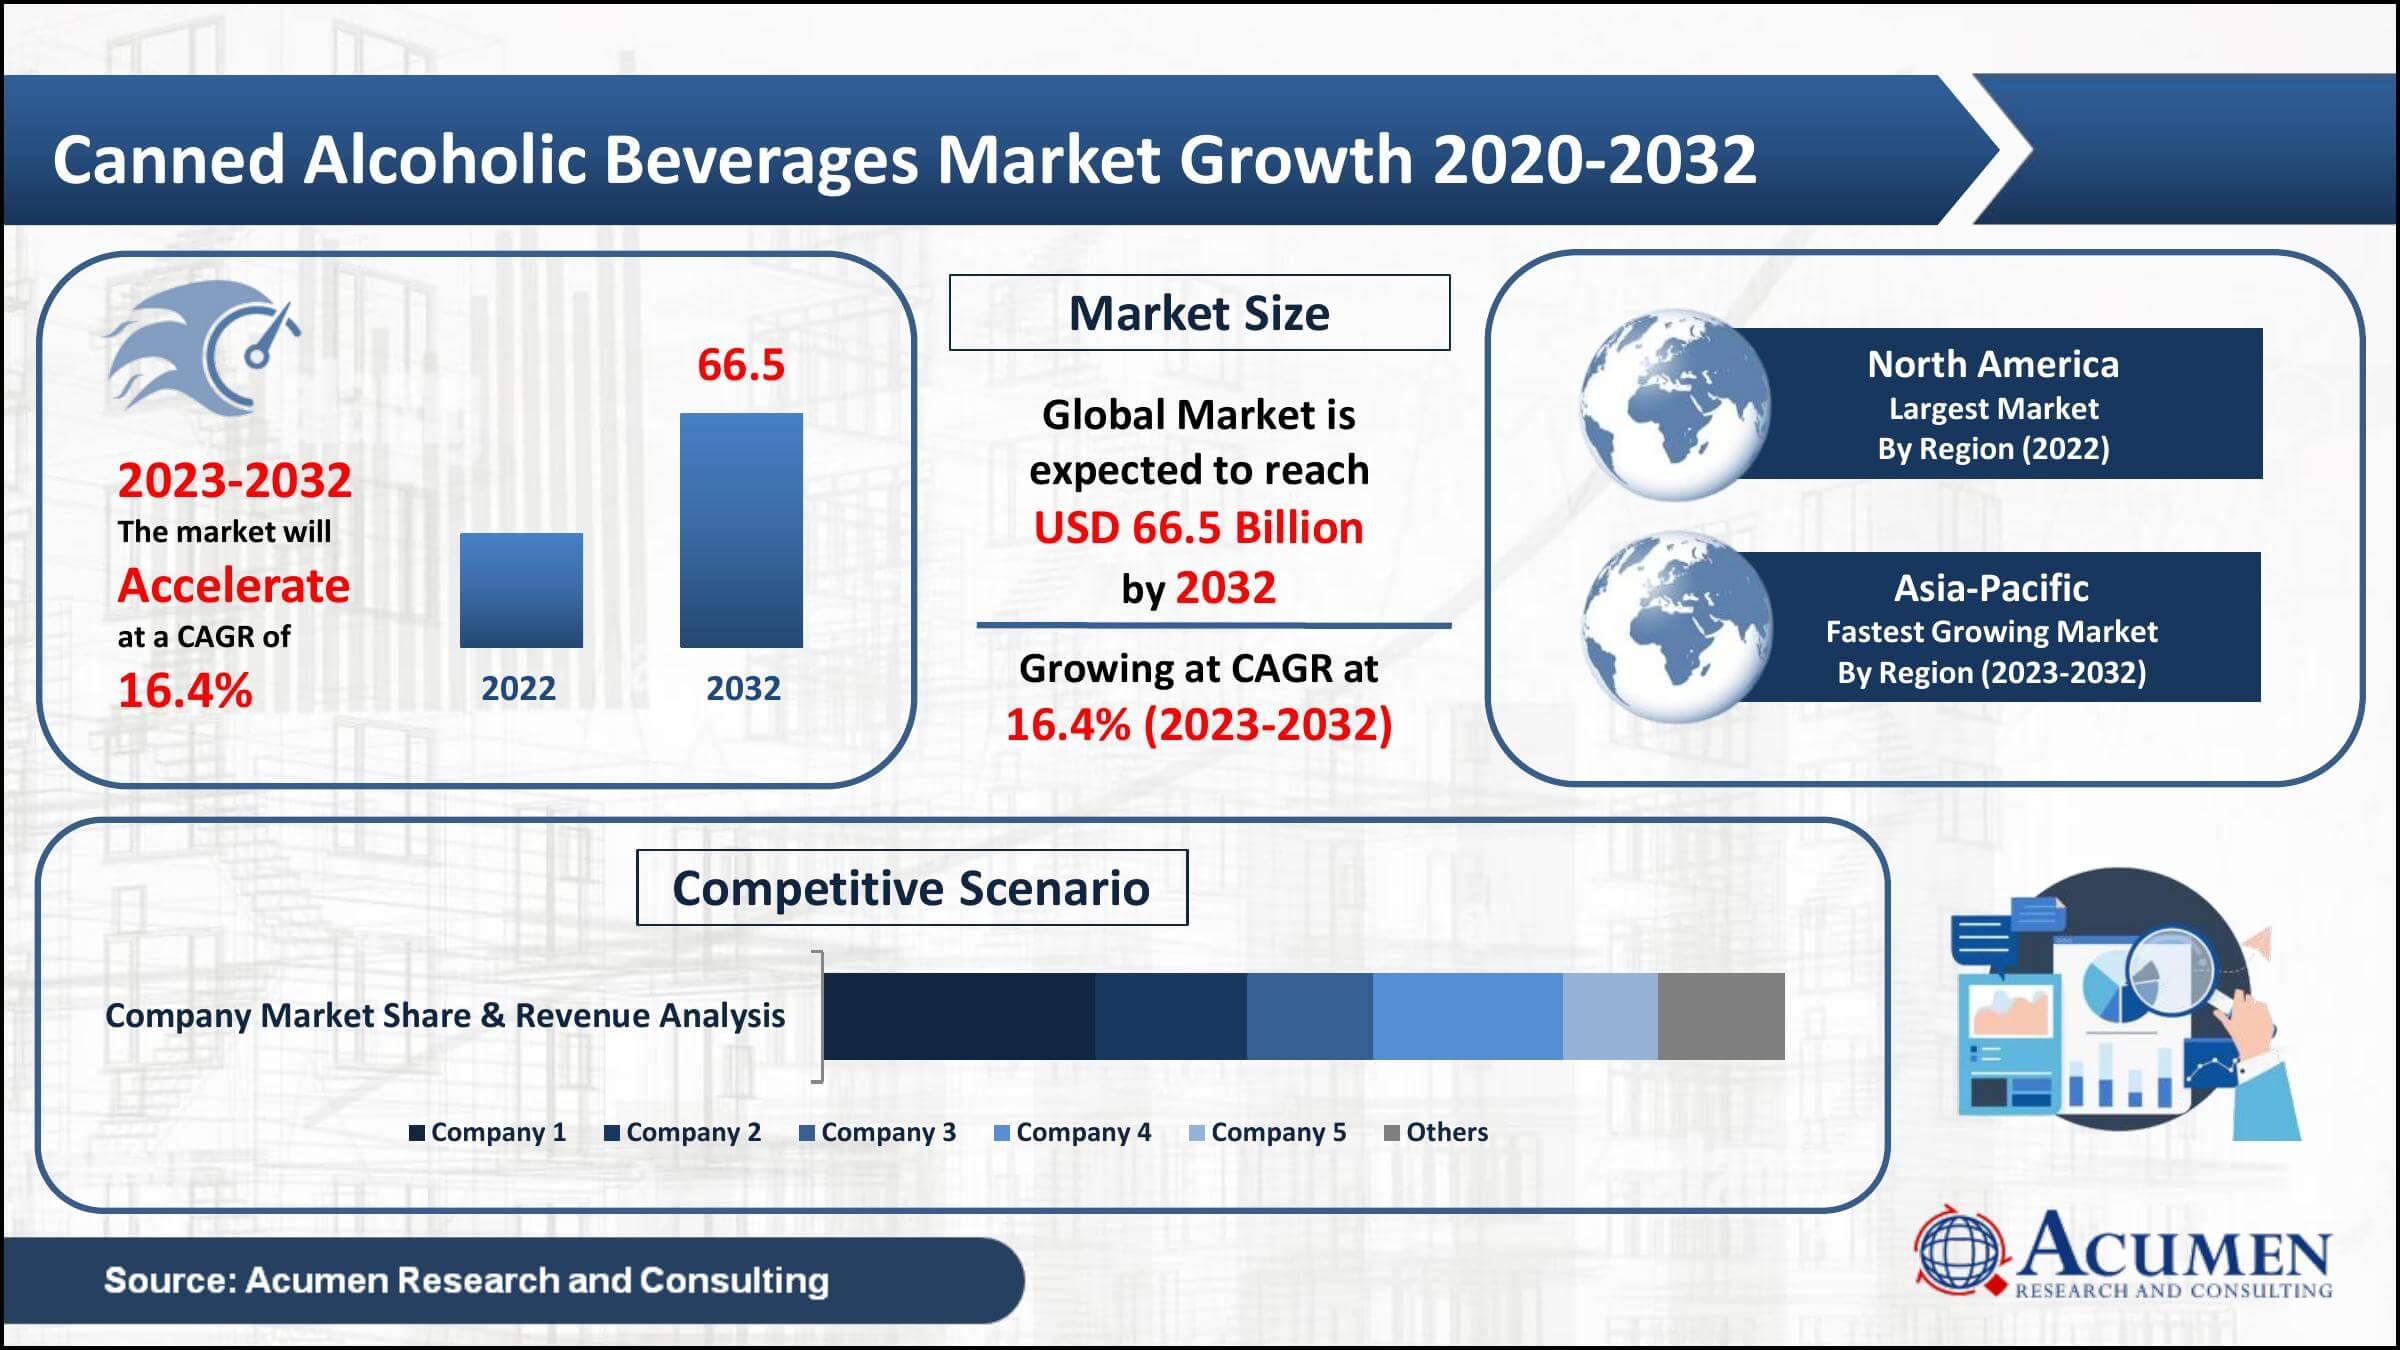 Canned Alcoholic Beverages Market Growth